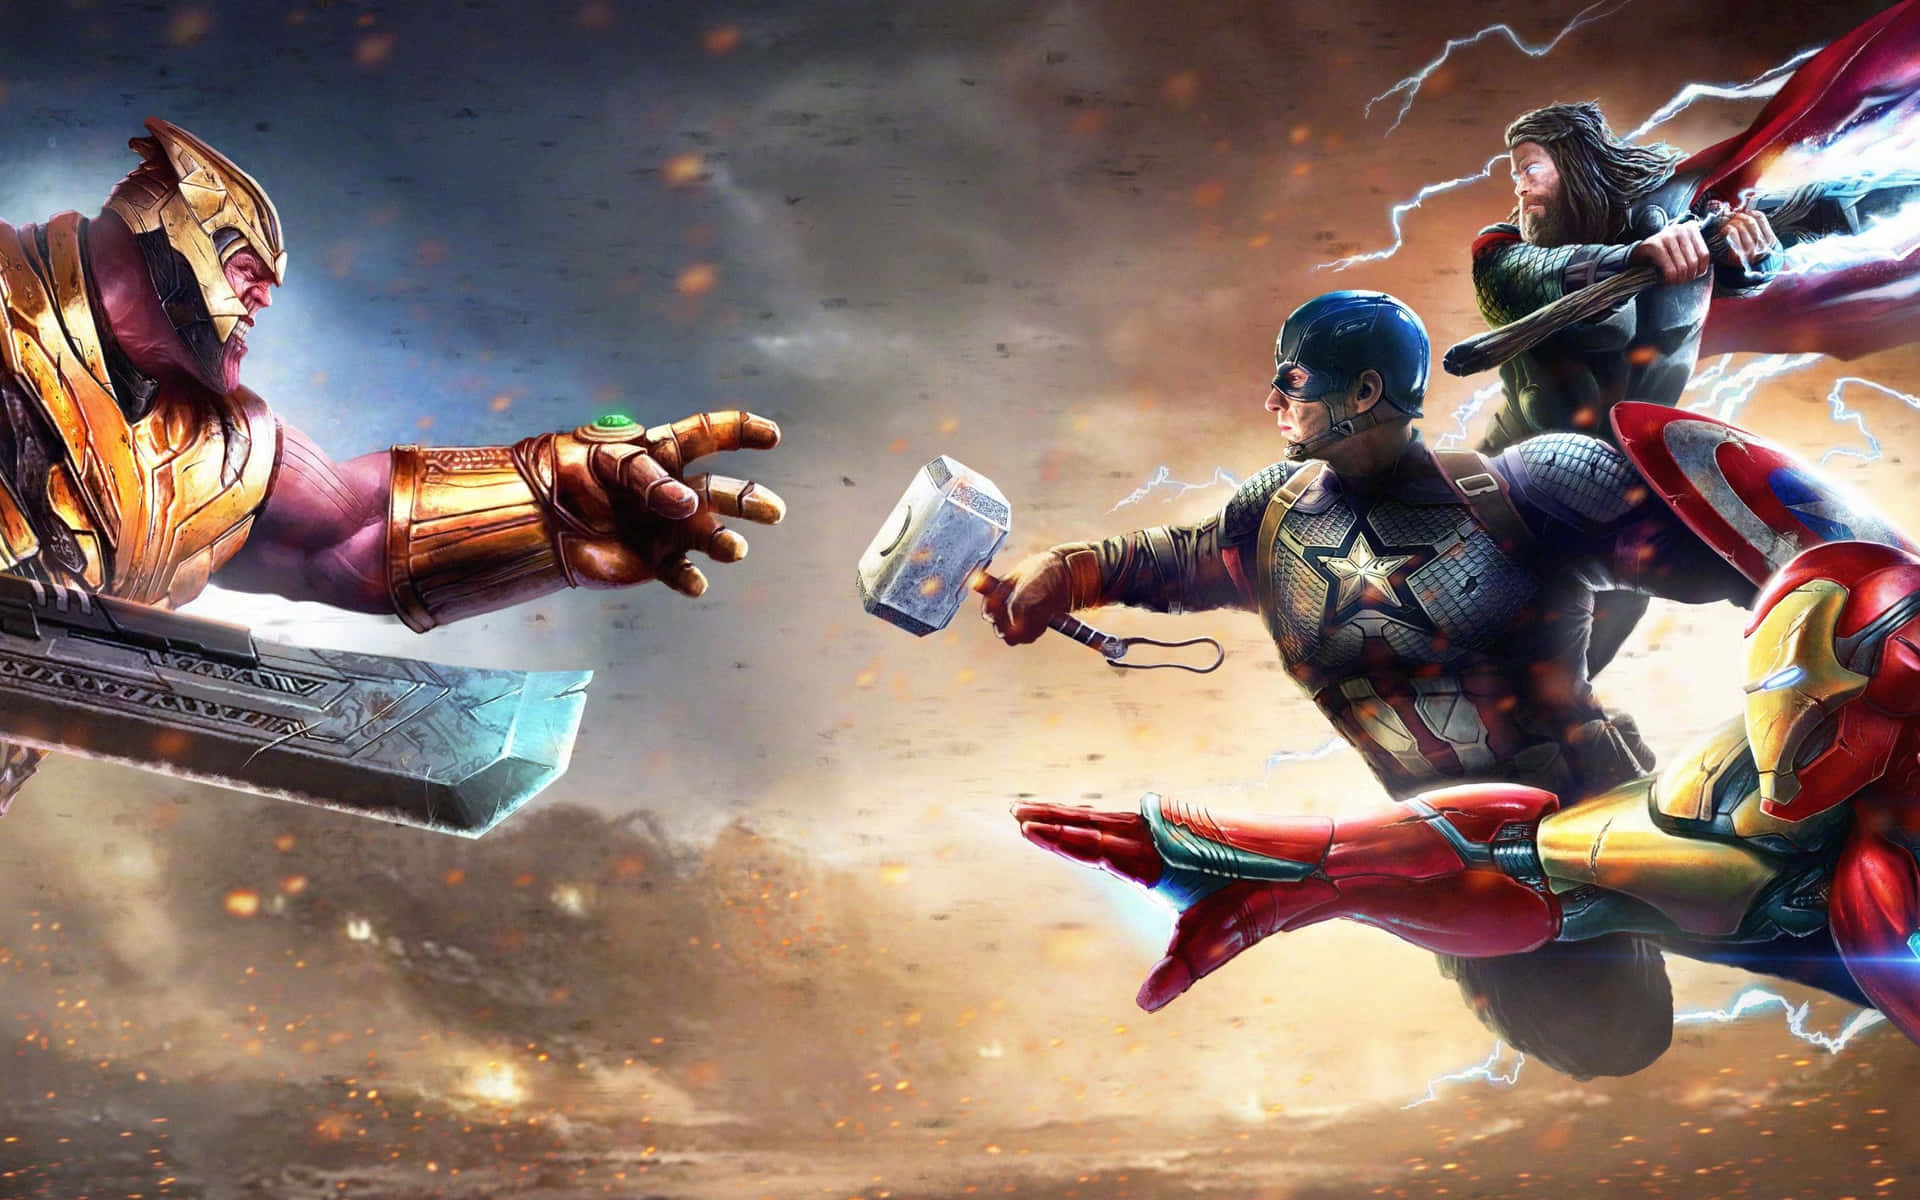 Iron Man and Thor in an Epic Showdown" Wallpaper